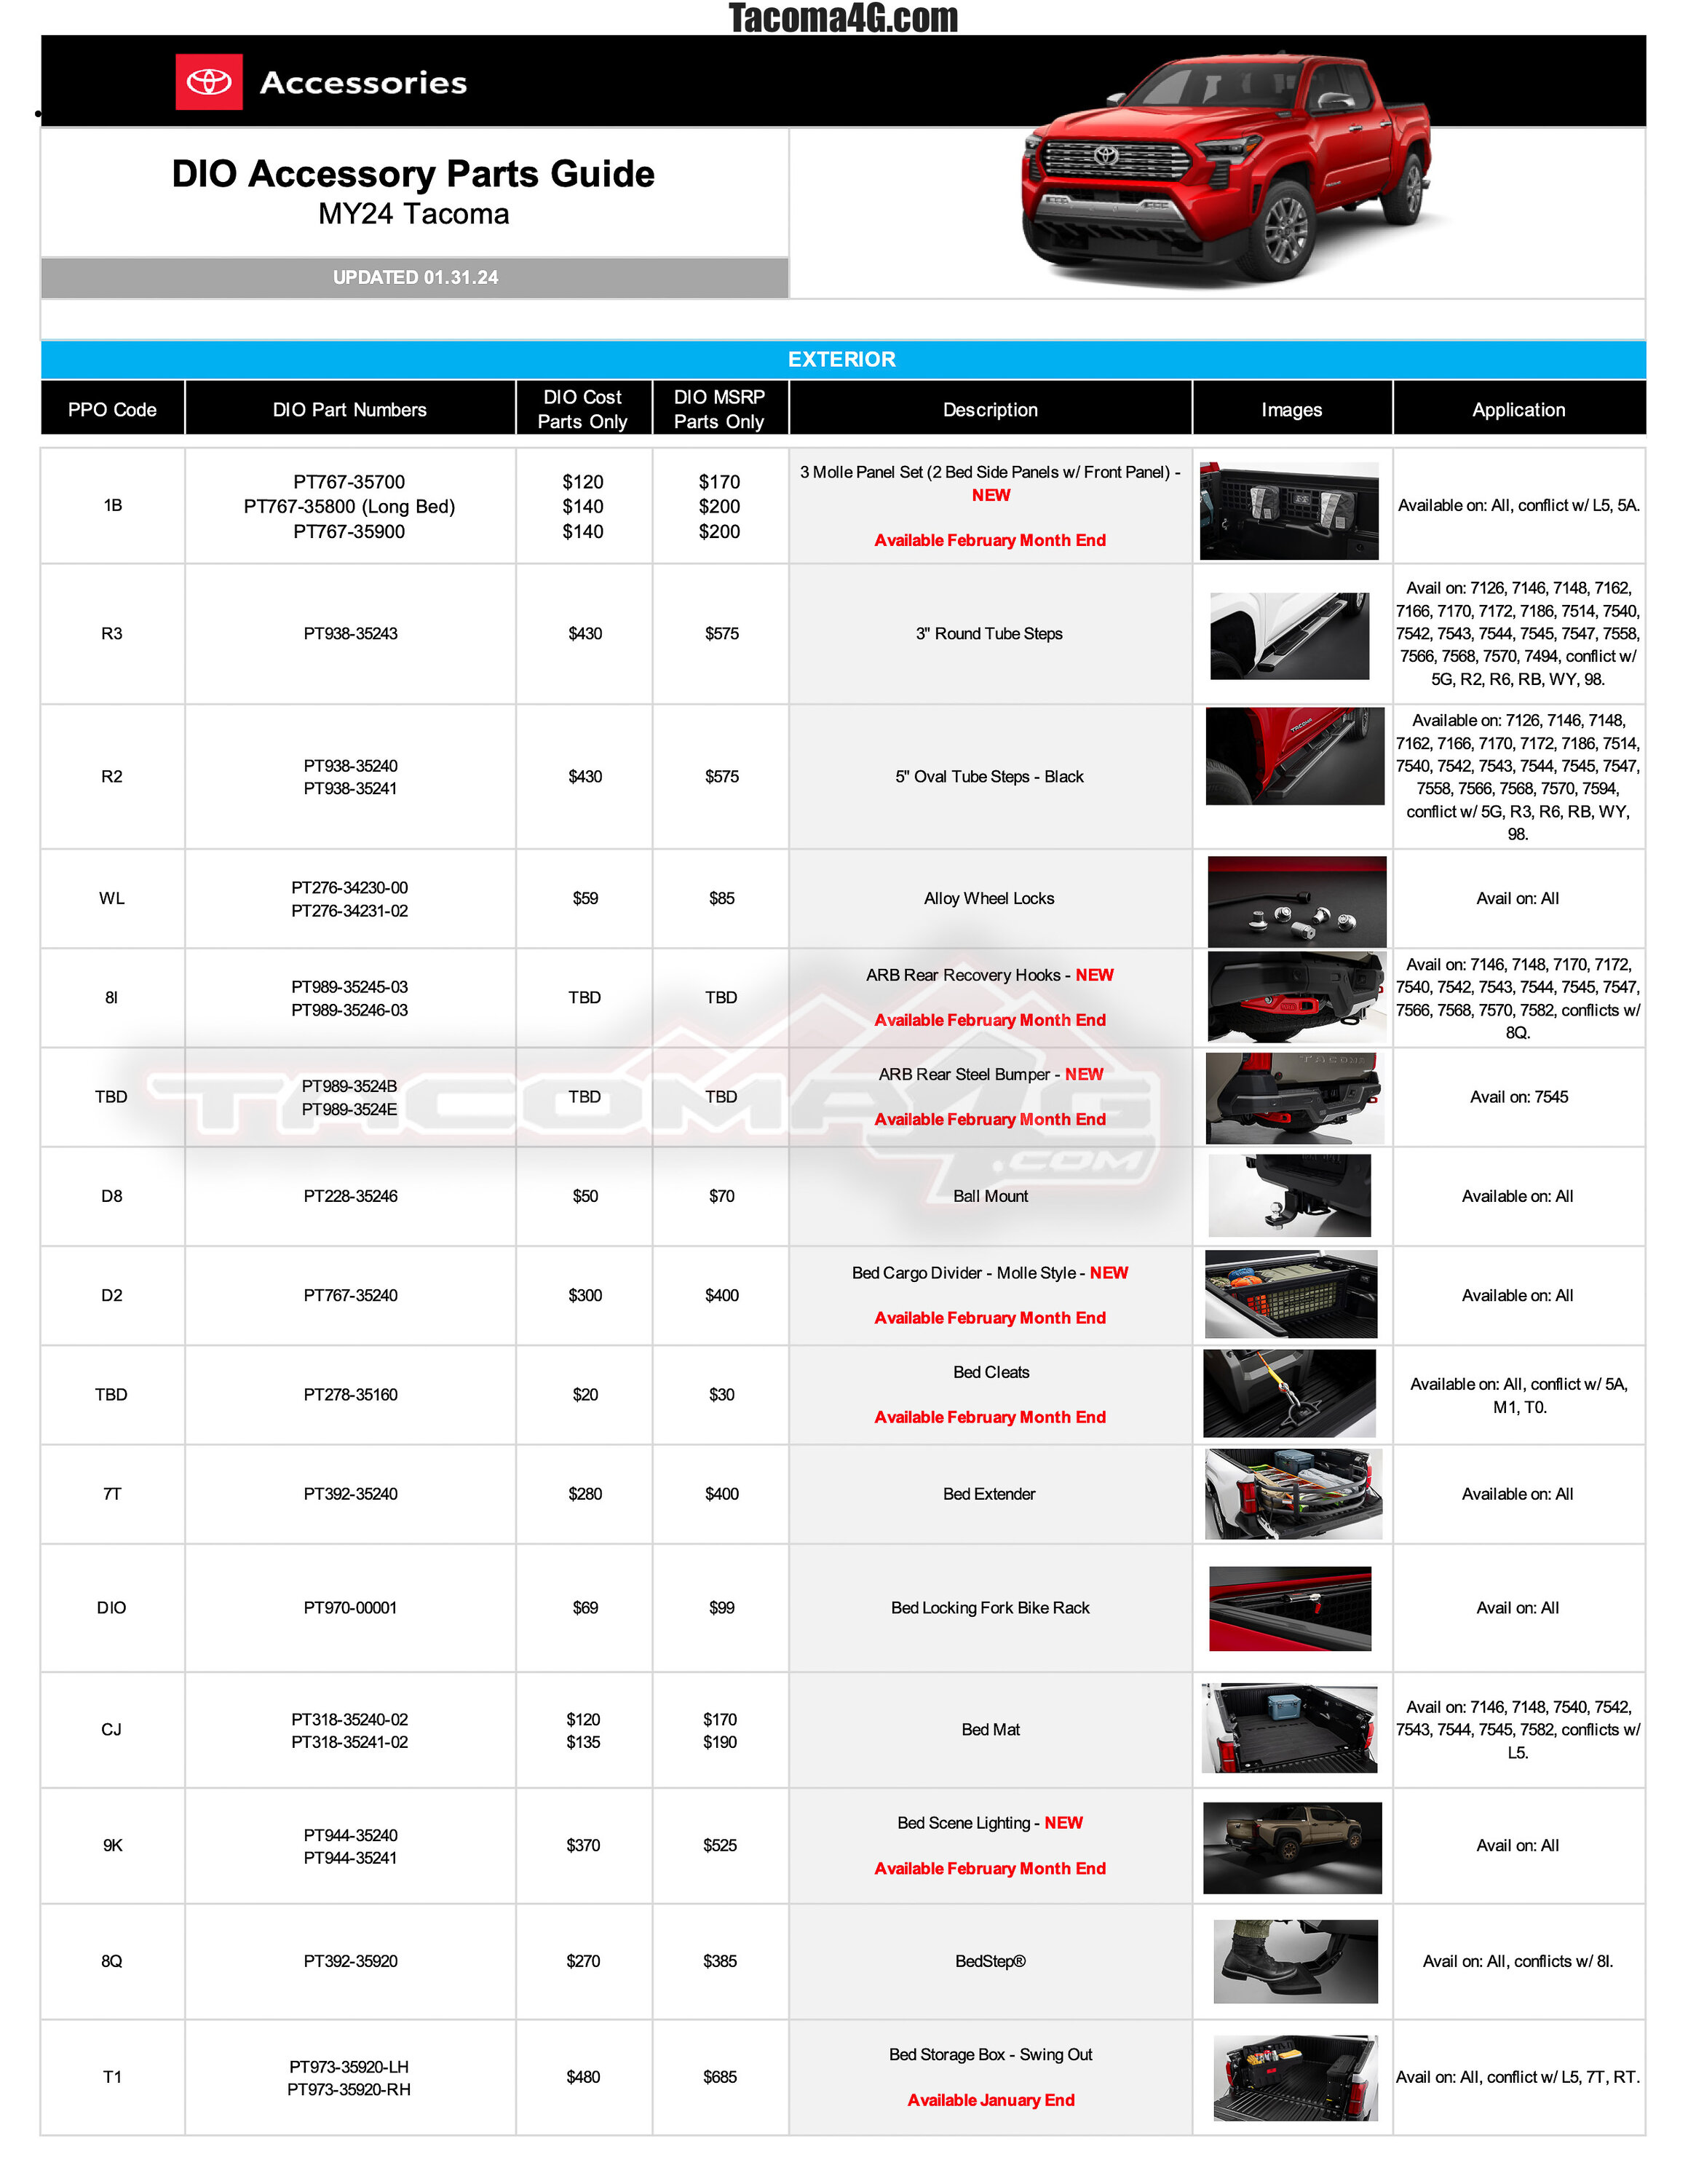 2024 Tacoma 2024 Tacoma Dealer Installed Options (DIO) Accessories Parts Guide + Pricing (Updated 4/2/24) 2024-Tacoma-DIO-Accessories-Parts-Guide_01_31_24-1